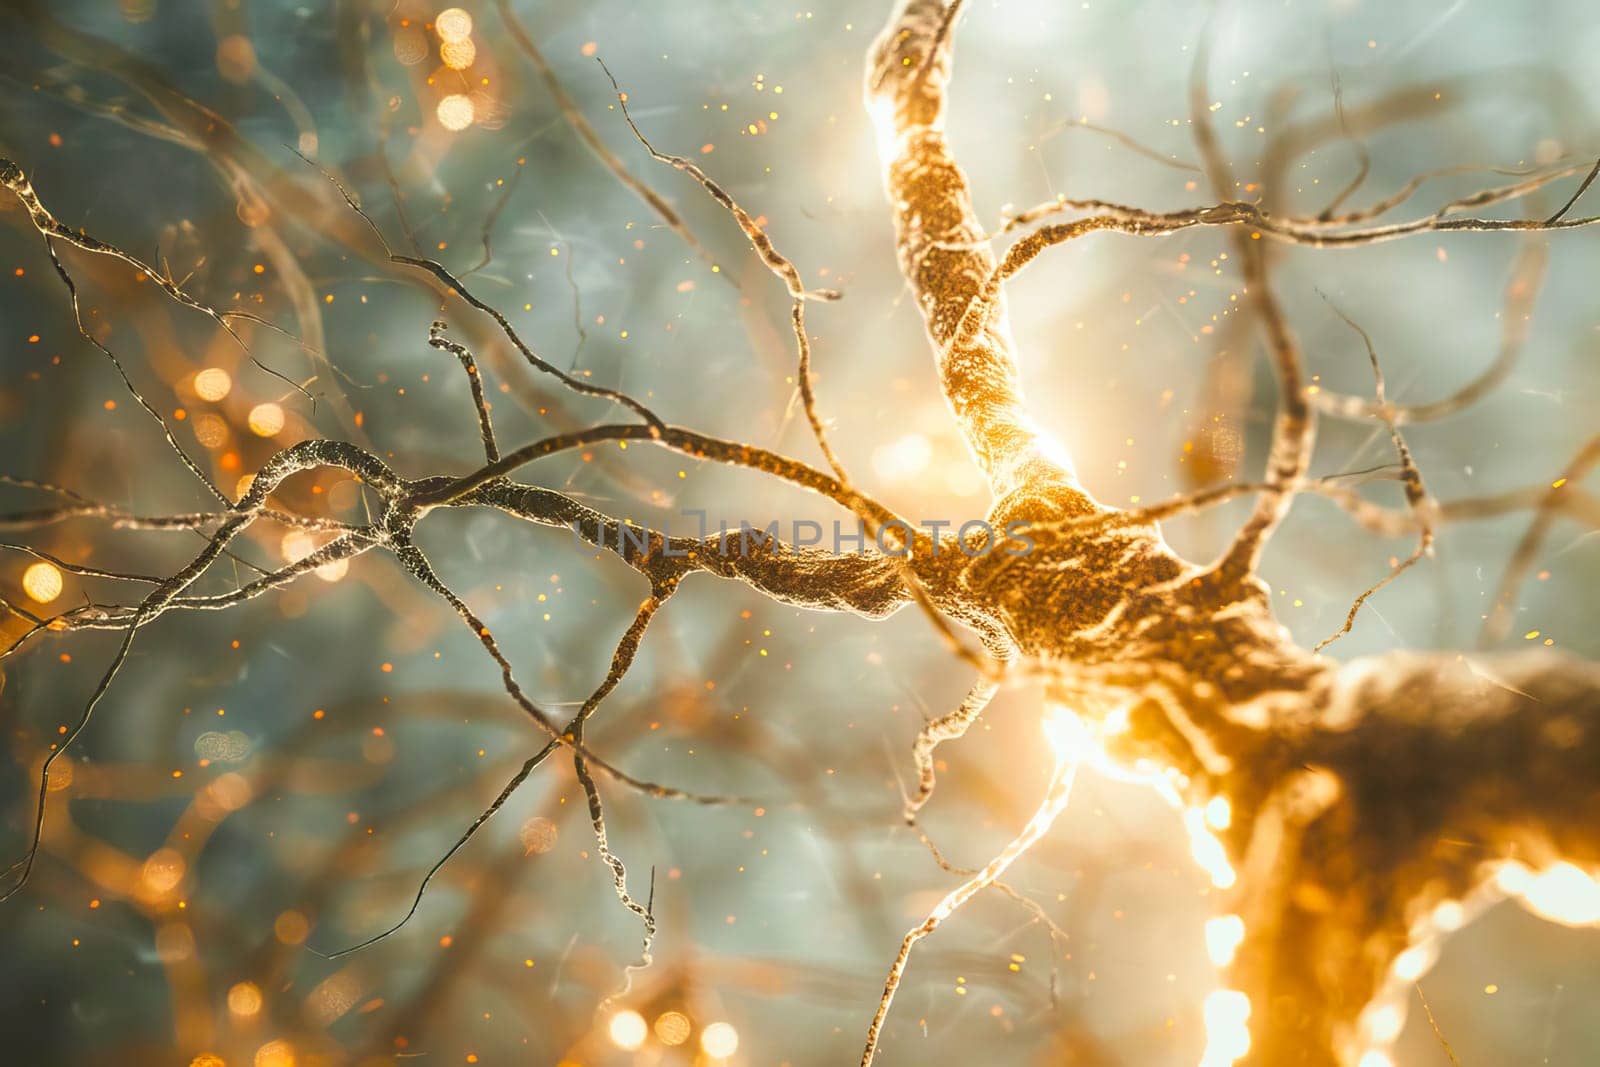 Neurons interconnected with glowing synapses in a close-up view.